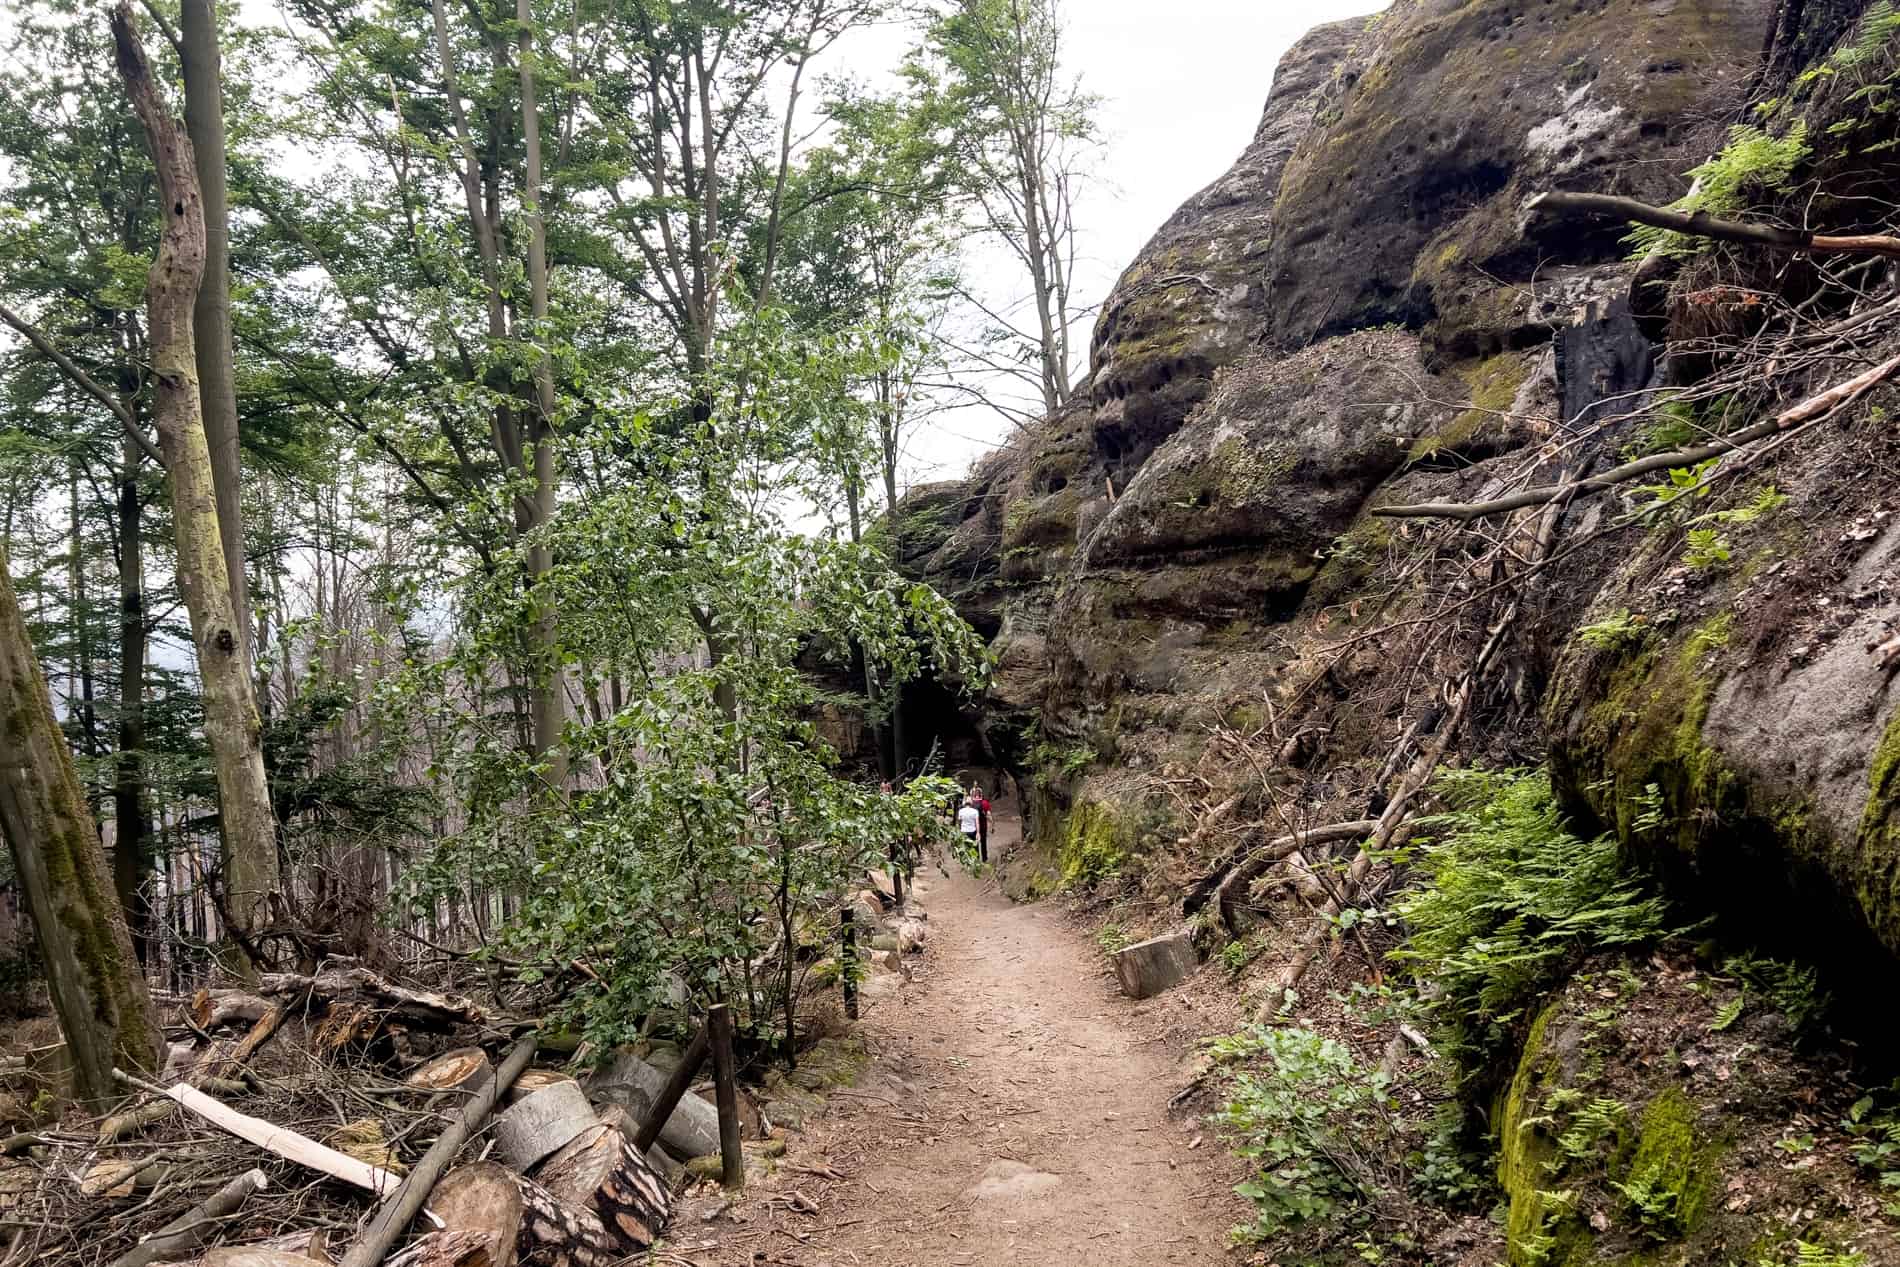 People hike on the rocky, forest pathway at the foot of Pravcicka Gate in Bohemian Switzerland. 